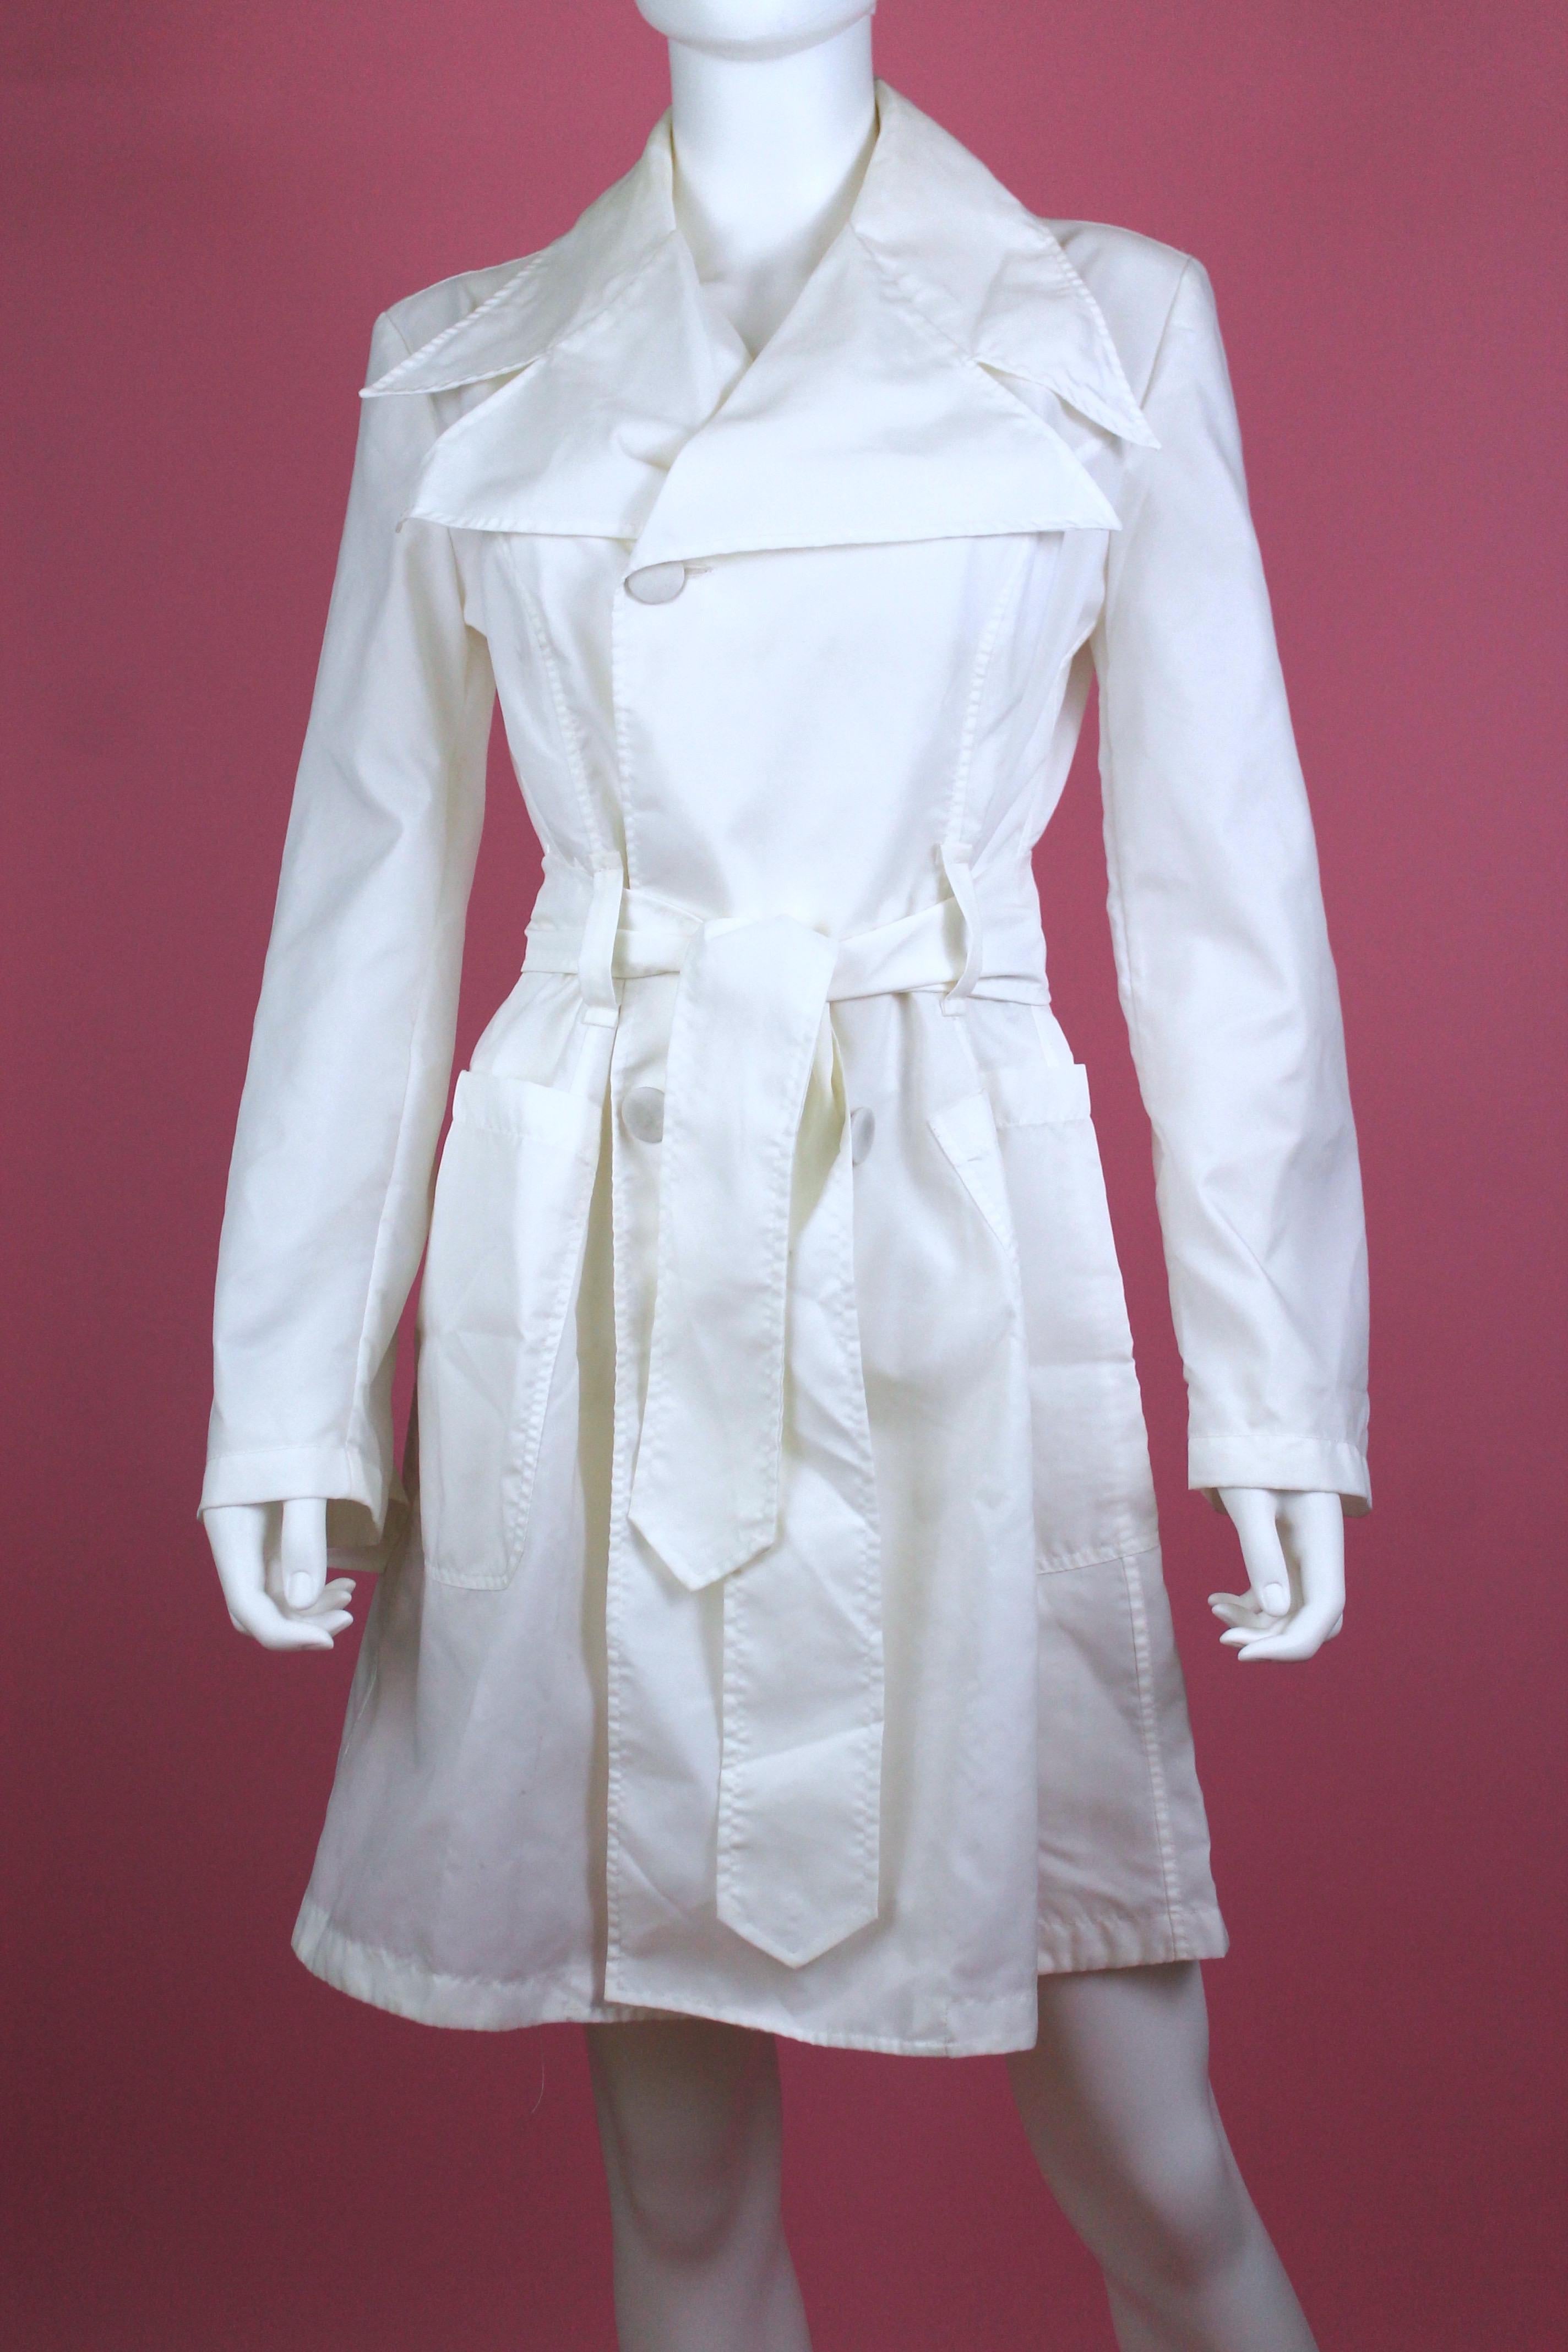 -White D&G double breasted trench coat with belt
-Has big logo on the upper, center back.
-Lightweight and waterproof
-Sized US 6 / IT 42 
-Made in Italy

Approximate Measurements
-Total length: 37